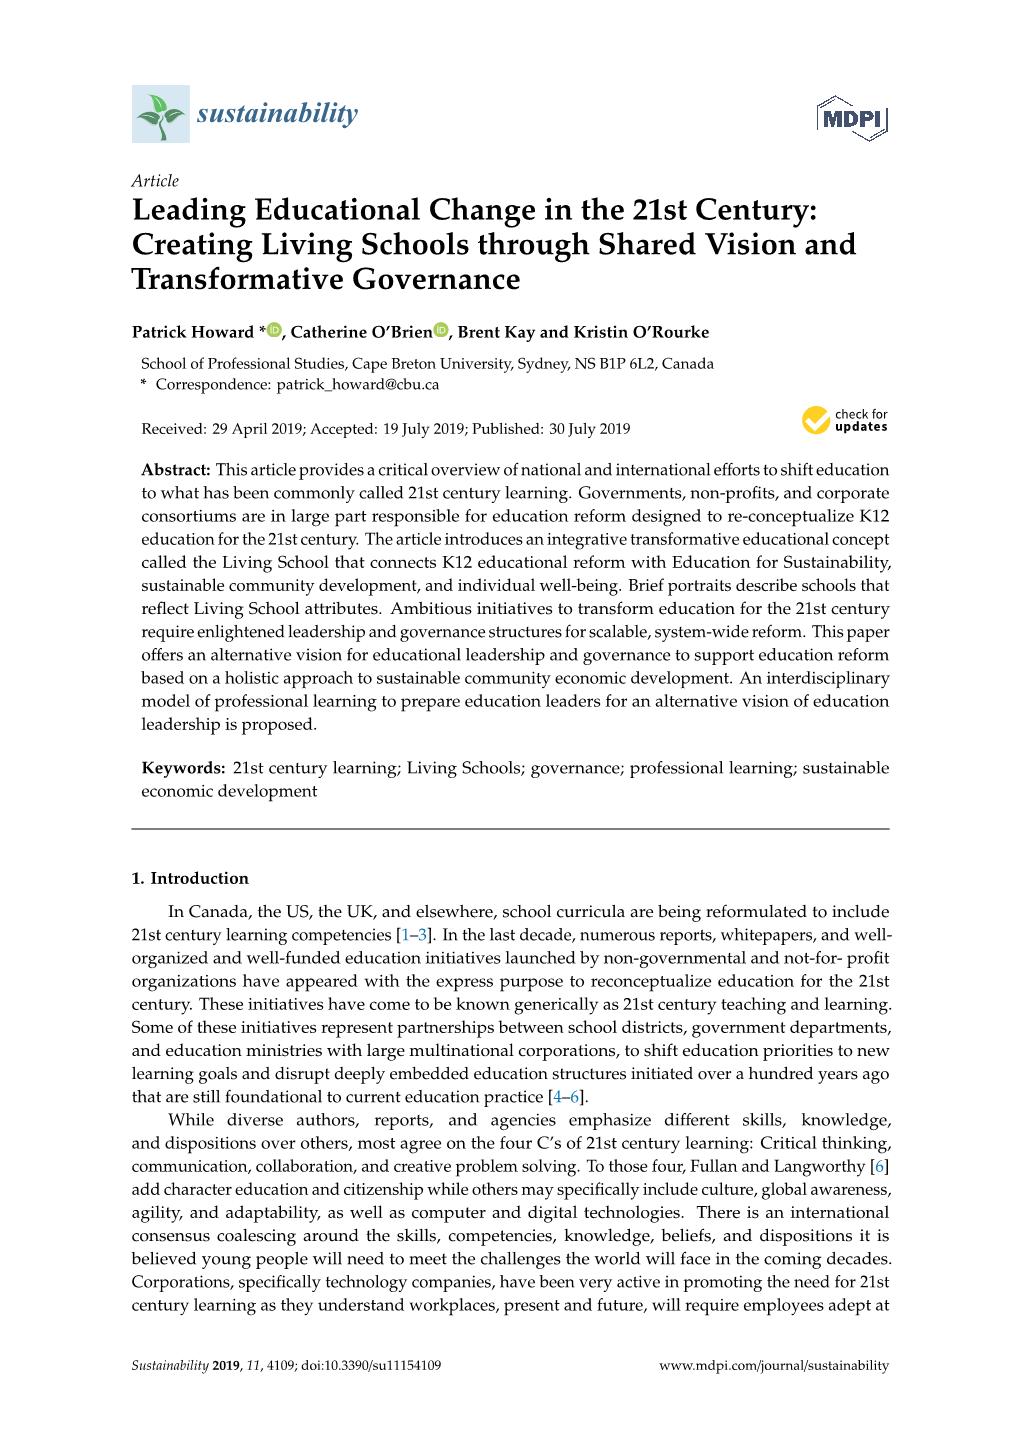 Leading Educational Change in the 21St Century: Creating Living Schools Through Shared Vision and Transformative Governance